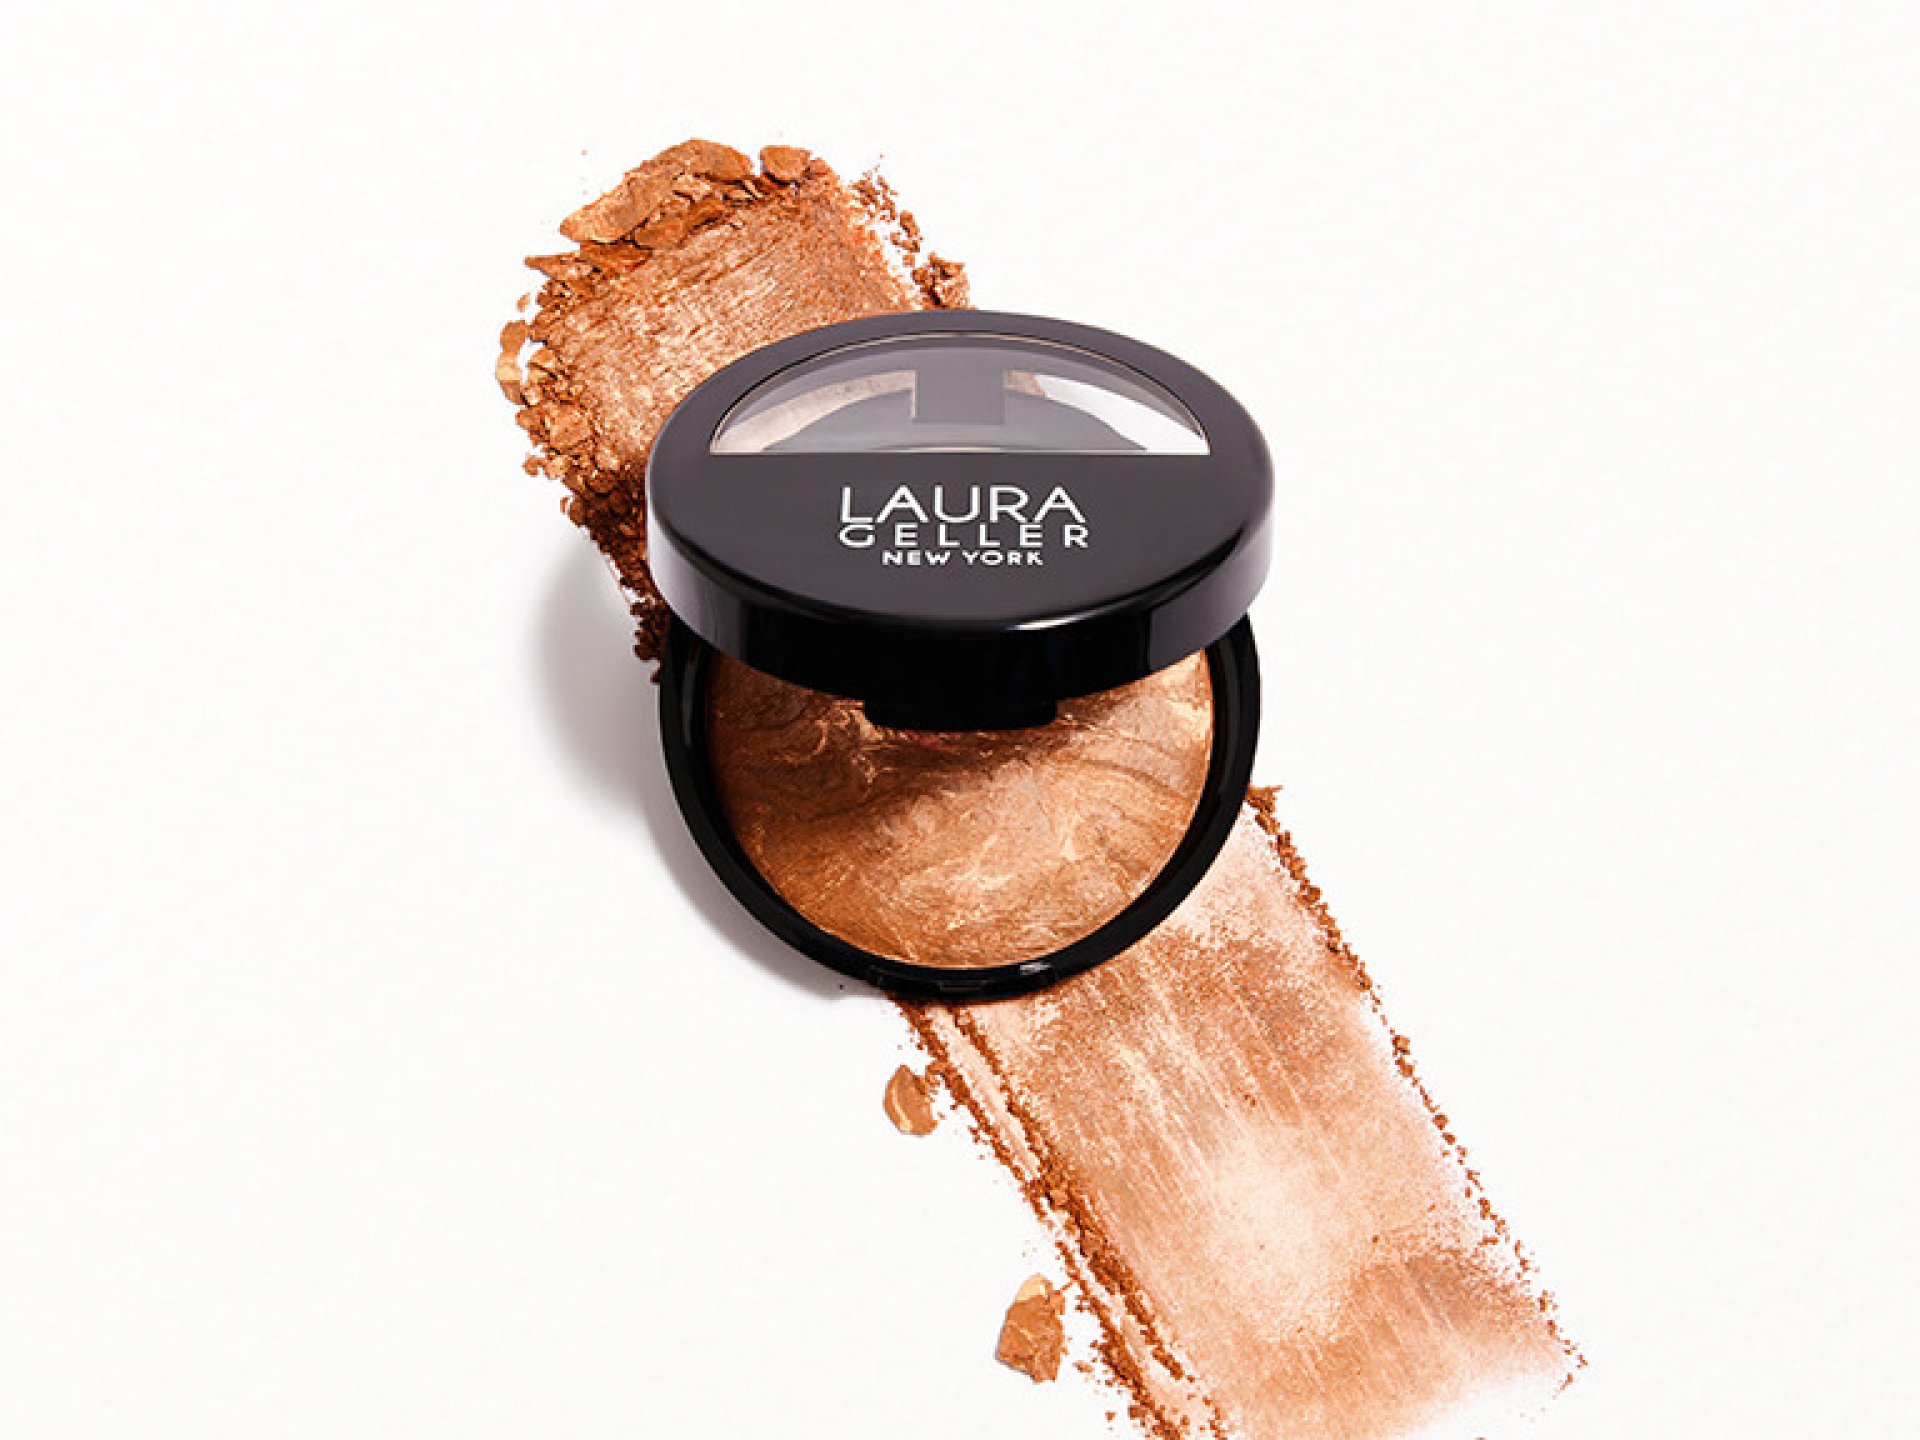 LAURA GELLER Baked Balance-n-Brighten Color Correcting Foundation in Toffee